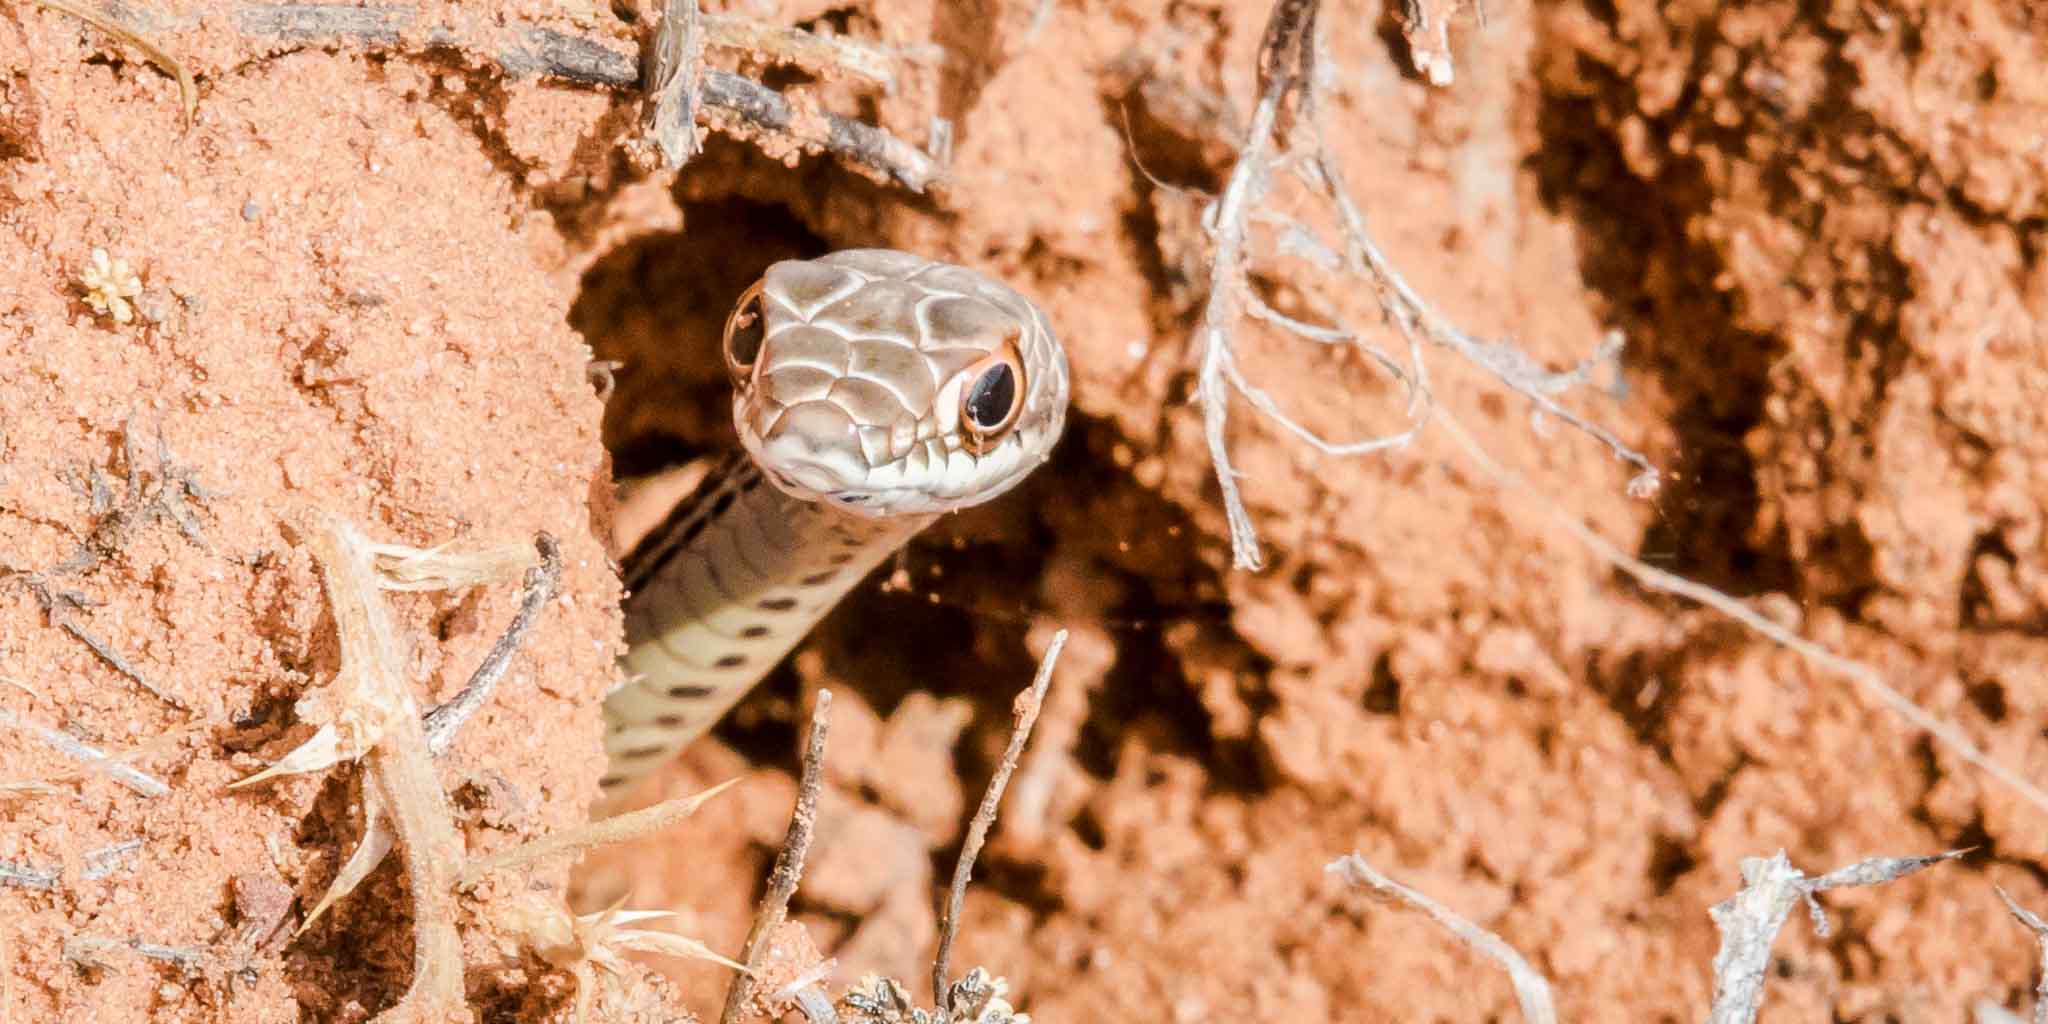 Western Patch-nosed Snake peering from burrow, Lockhart Road, Monticello UT